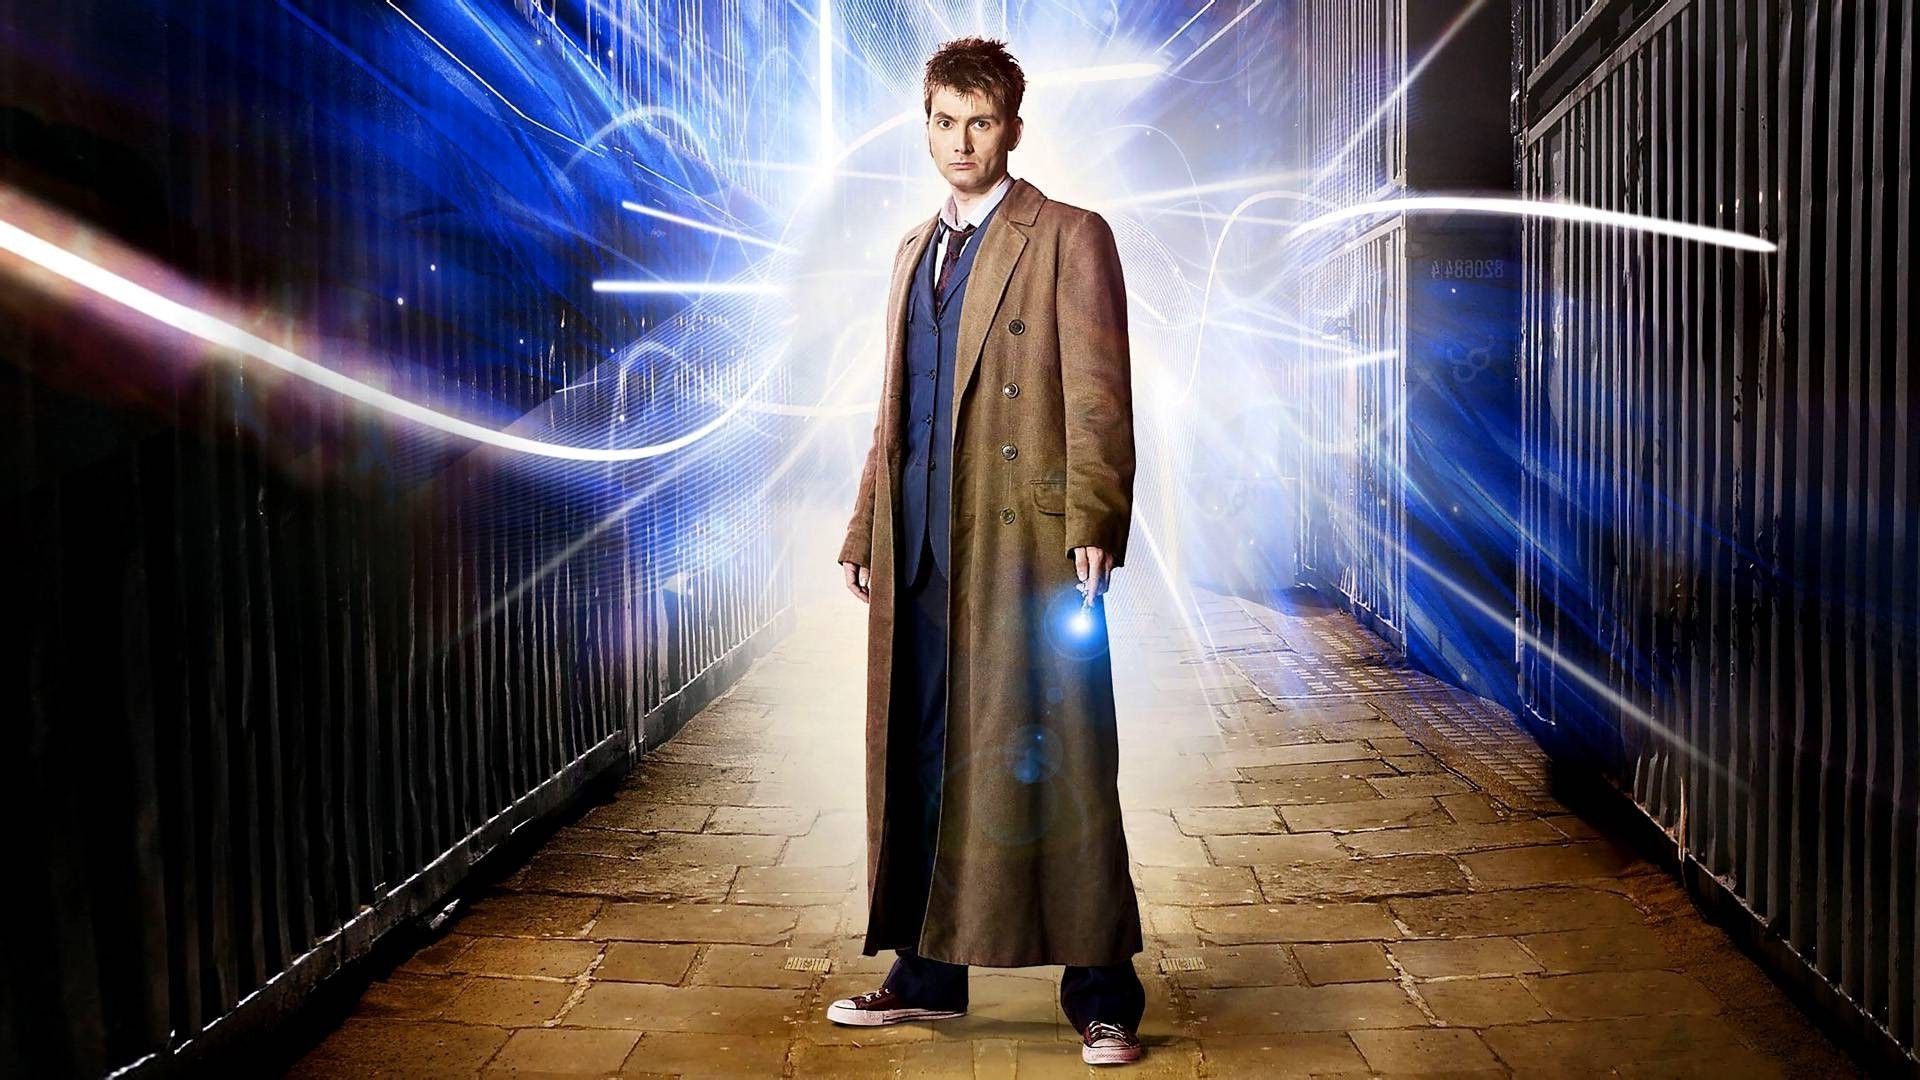 Doctor who the doctor tardis david tennant tenth doctor wallpapers hd desktop and mobile backgrounds